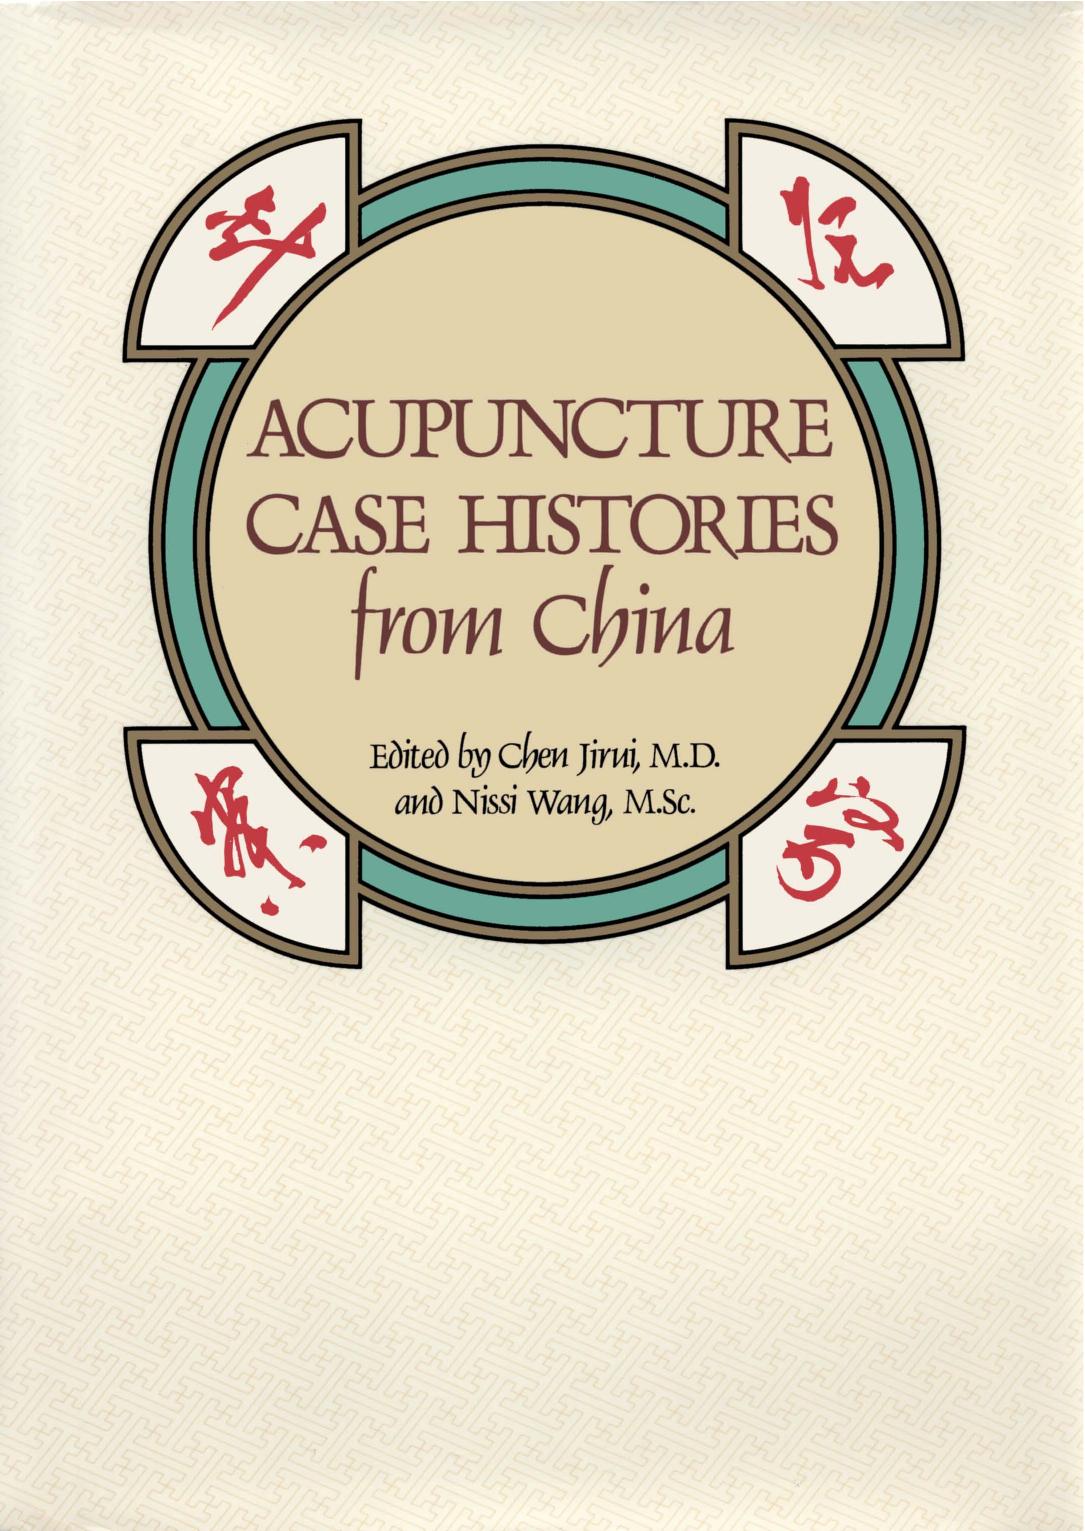 Acupuncture Case Histories from China by Chen Jirui Nissi Wang